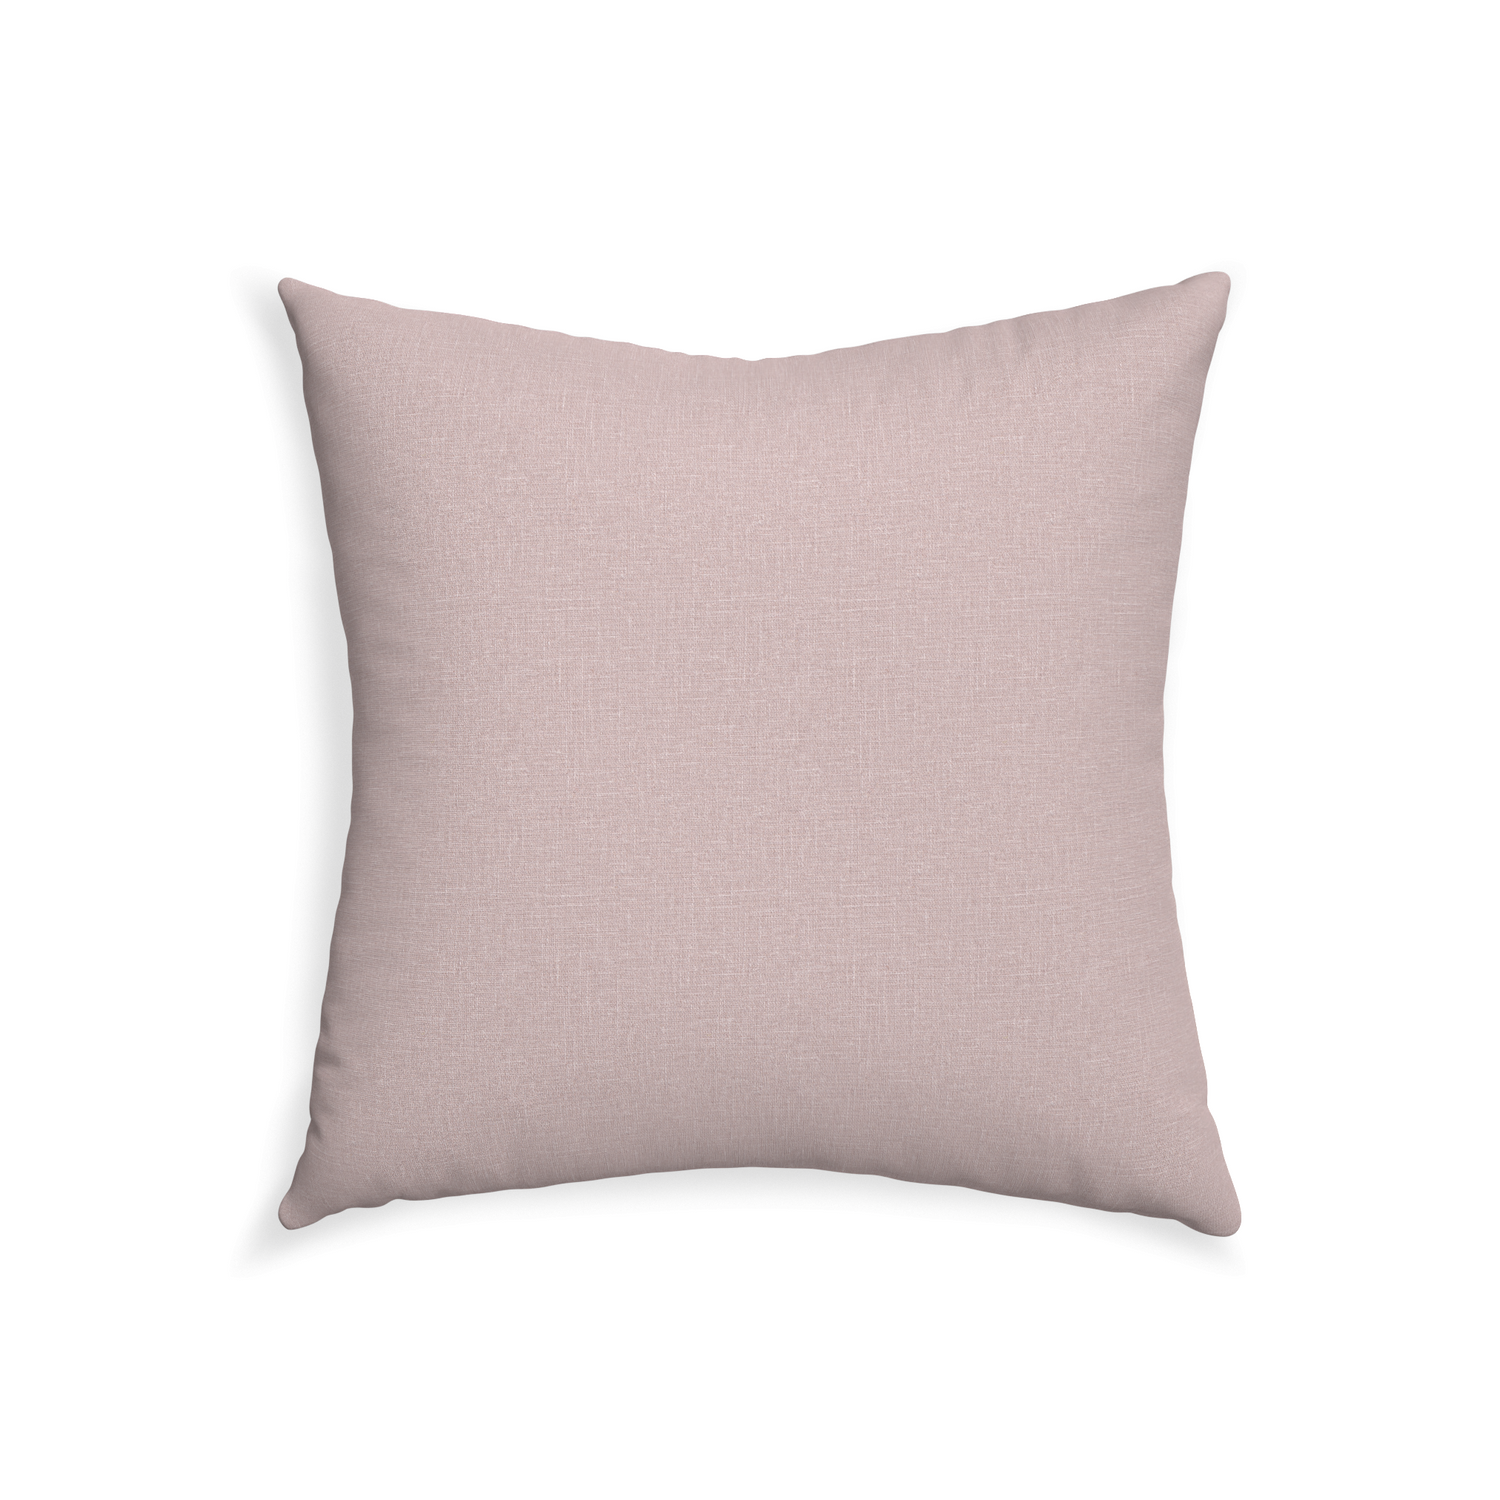 22-square orchid custom mauve pinkpillow with none on white background